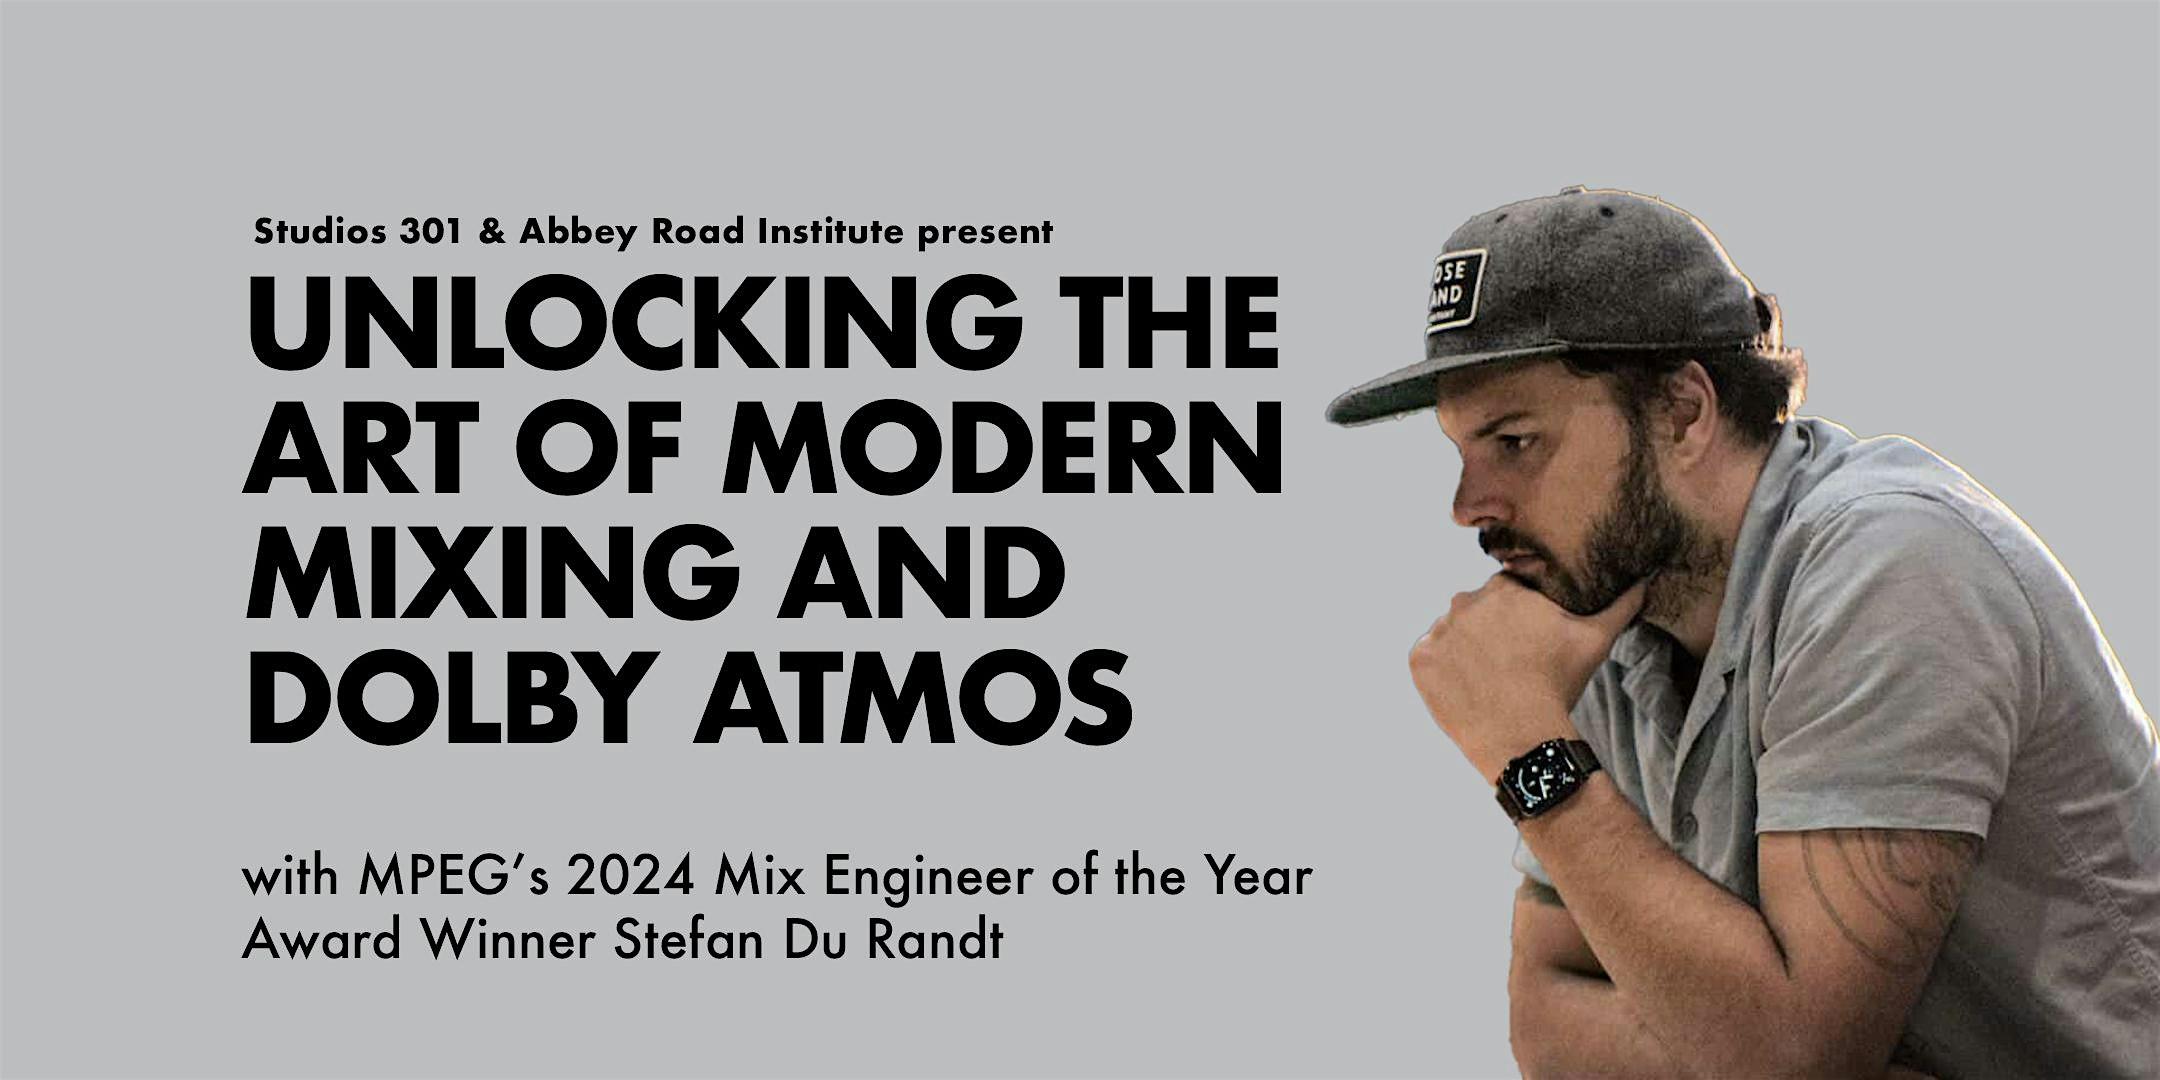 Unlocking the Art of Modern Mixing and Dolby Atmos with Stefan Du Randt